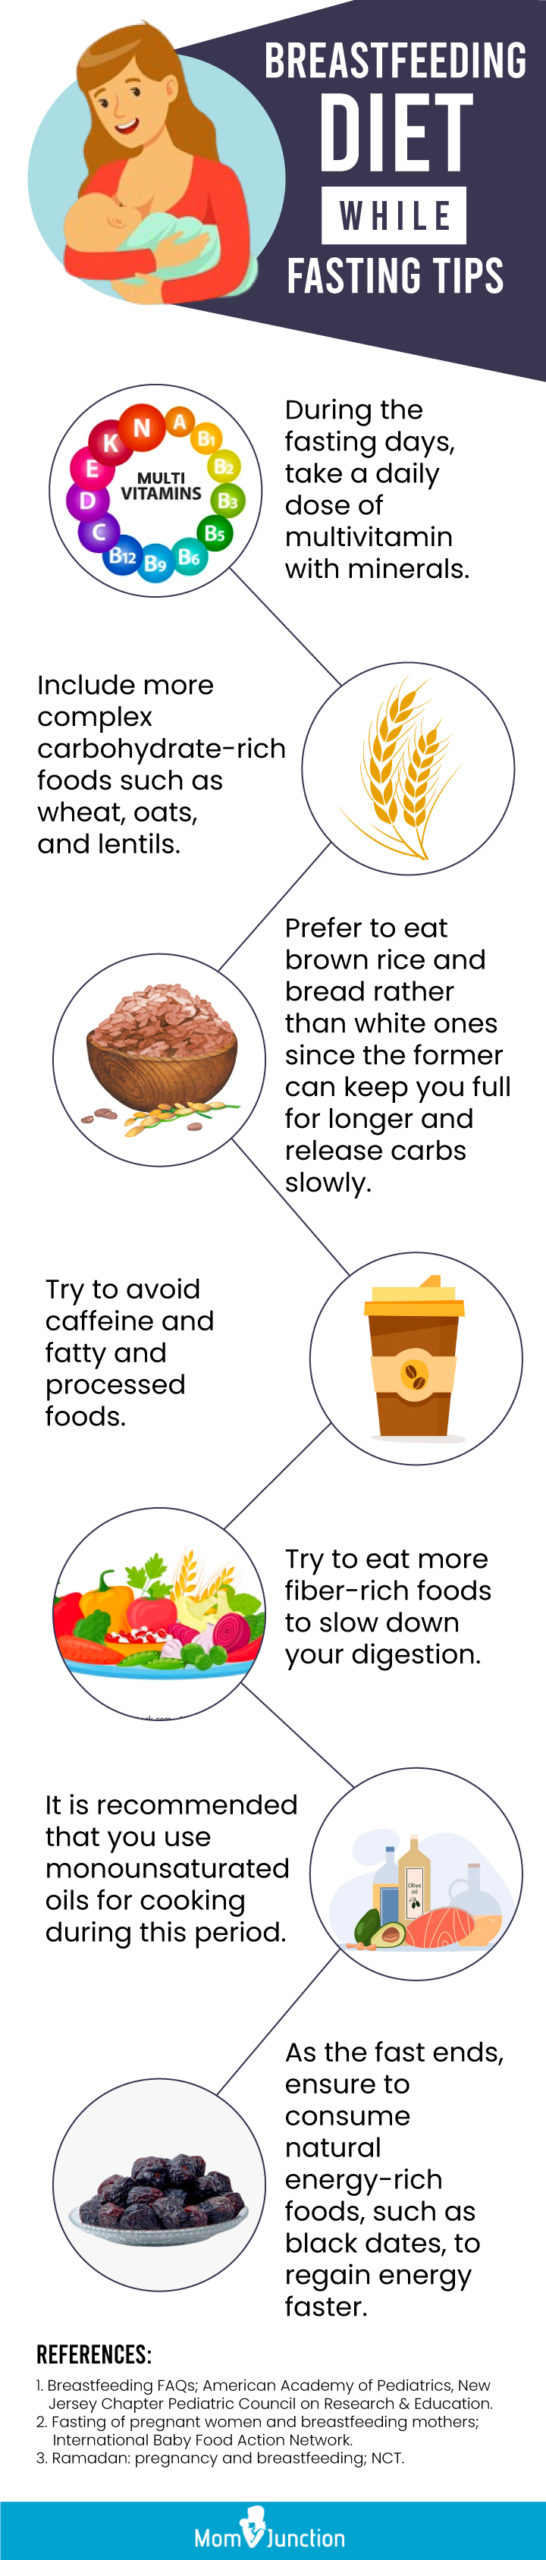 breastfeeding diet while fasting tips (infographic)